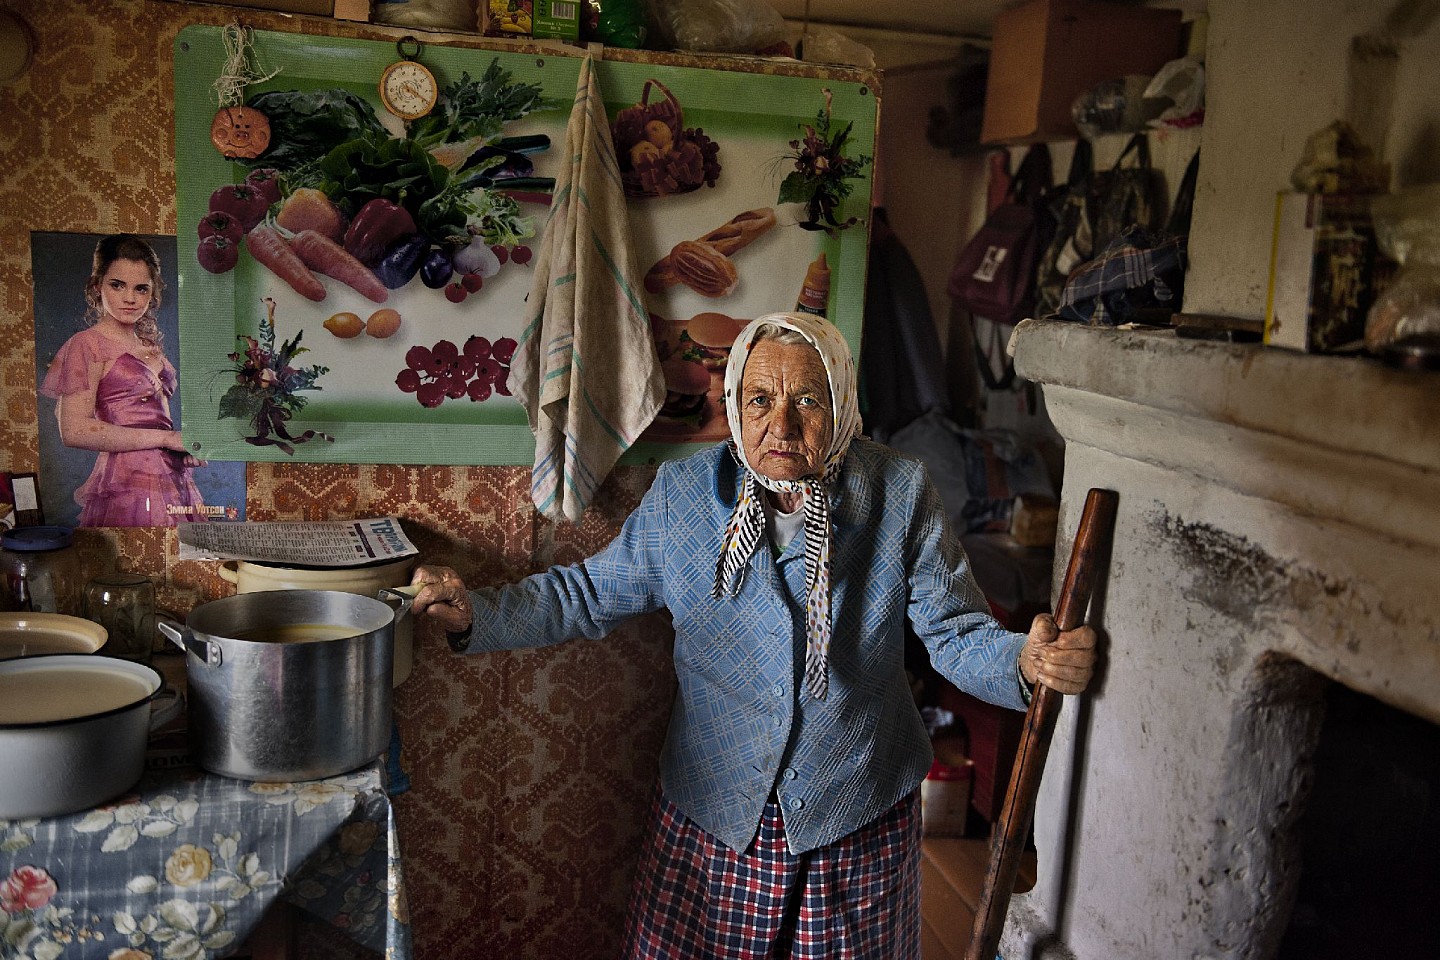 Steve McCurry, Elderly Woman Cooks
FujiFlex Crystal Archive Print
Price/Size on request